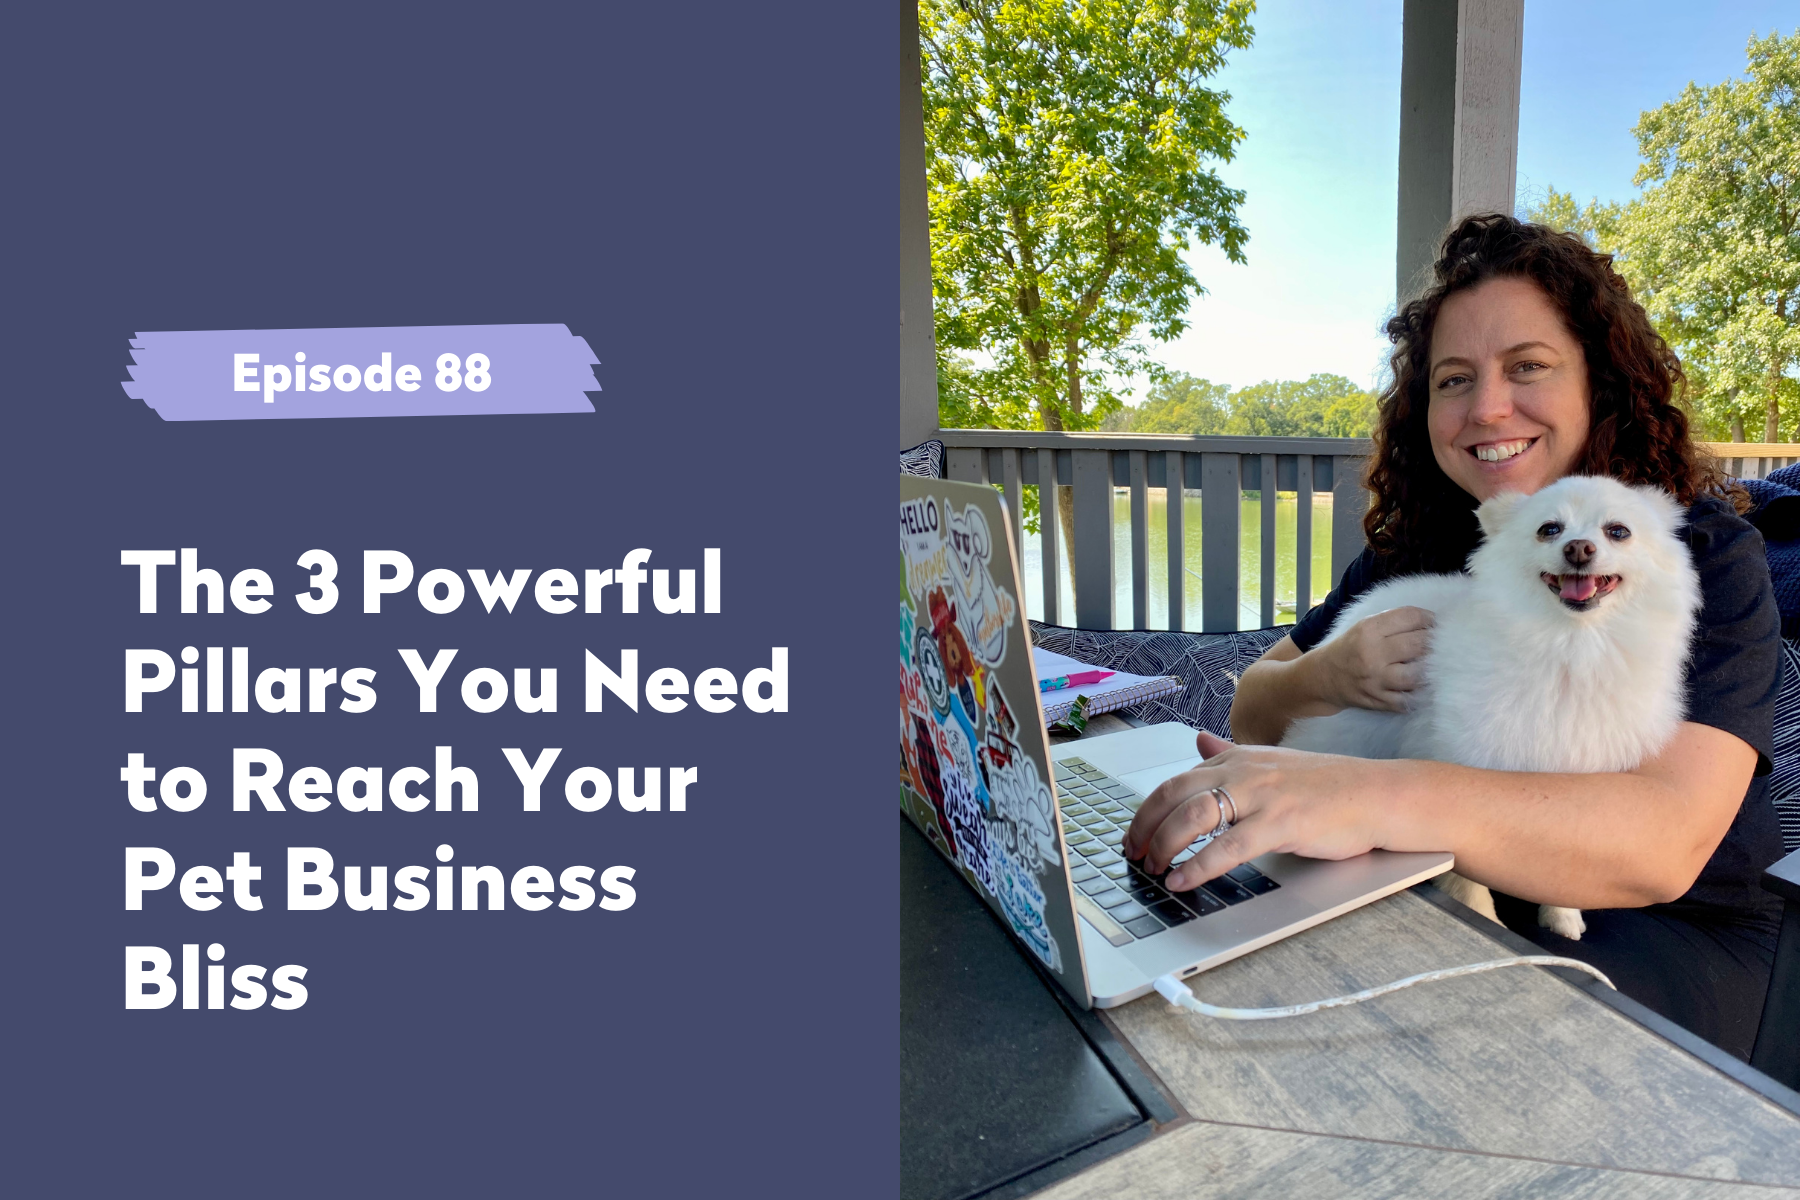 Episode 88 | The 3 Powerful Pillars You Need to Reach Your Pet Business Bliss